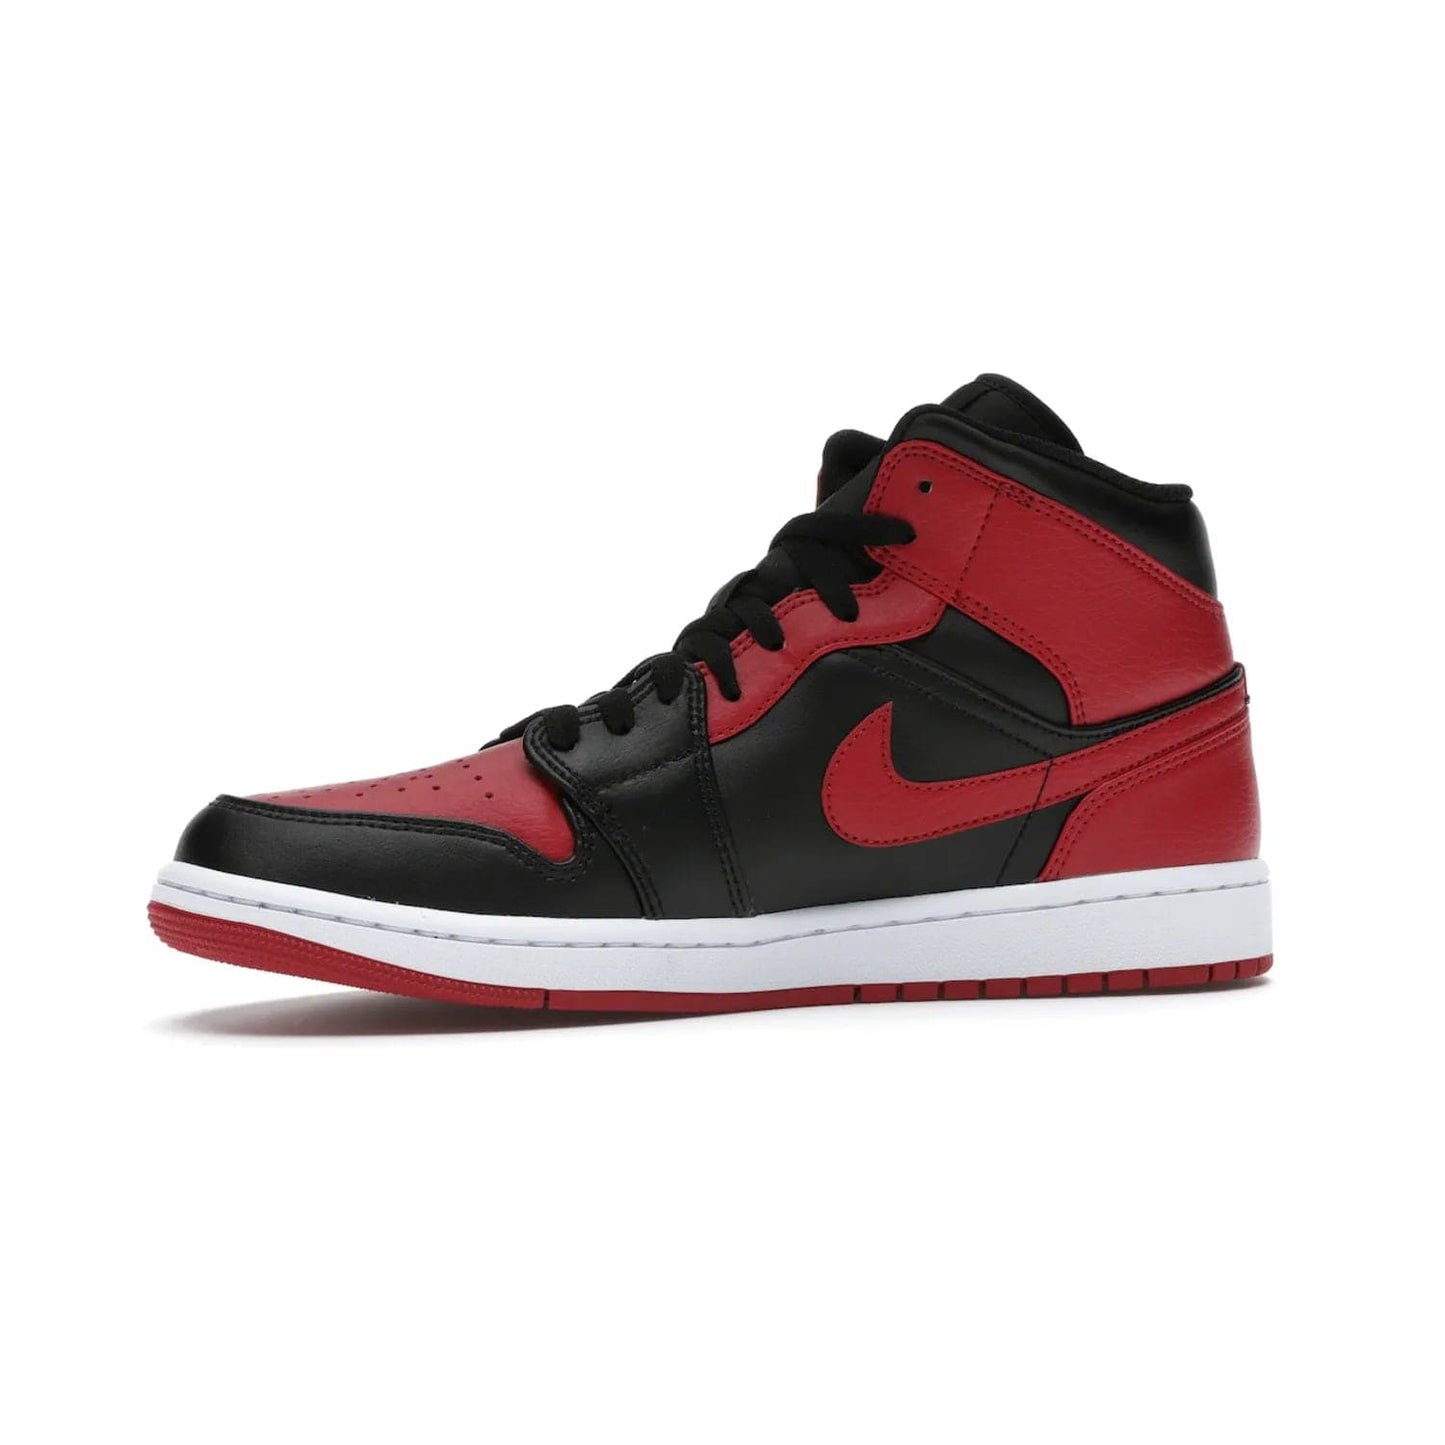 Jordan 1 Mid Banned (2020) - Image 17 - Only at www.BallersClubKickz.com - The Air Jordan 1 Mid Banned (2020) brings a modern twist to the classic Banned colorway. Features full-grain black and red leather uppers, red leather around the toe, collar, heel, & Swoosh. Release November 2021 for $110.